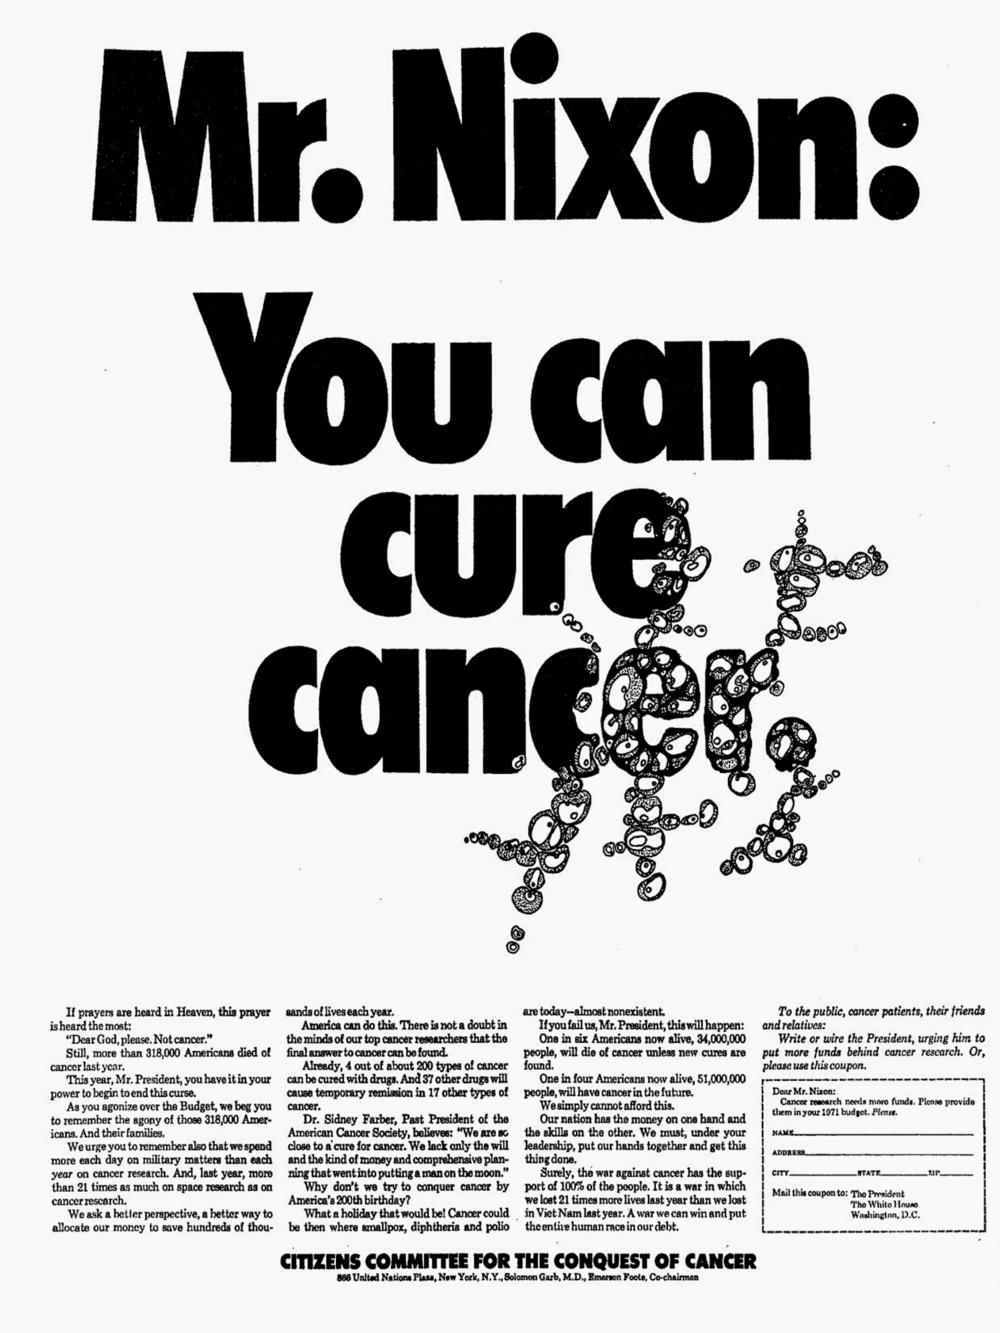 A full-page ad created by the Citizens for the Conquest of Cancer, which Lasker founded, appeared in the Washington Post on Dec. 9, 1969.